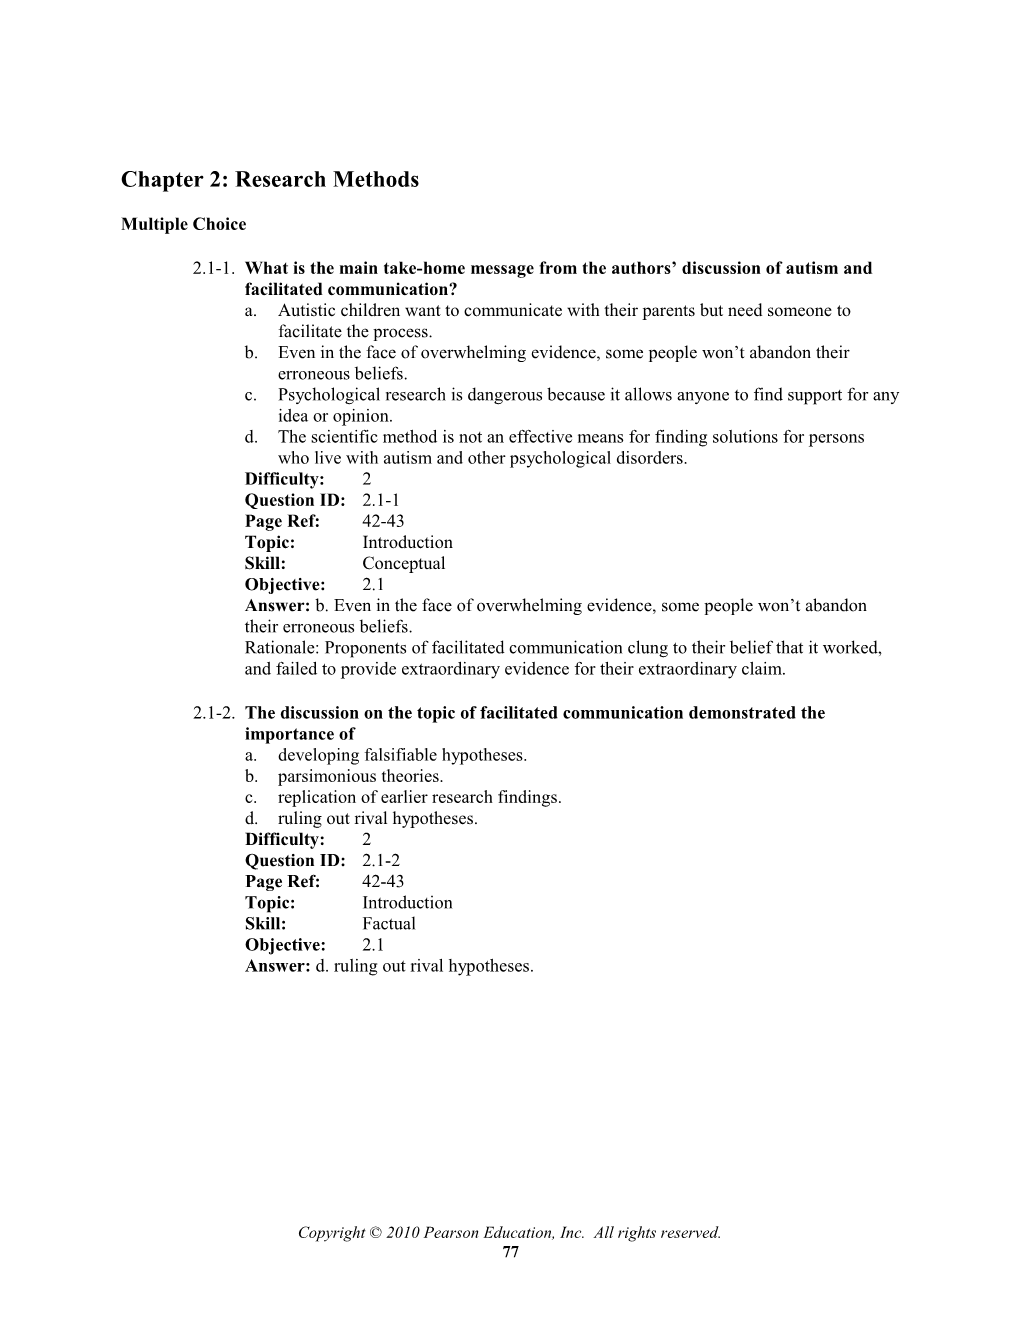 Chapter 02 Research Methods